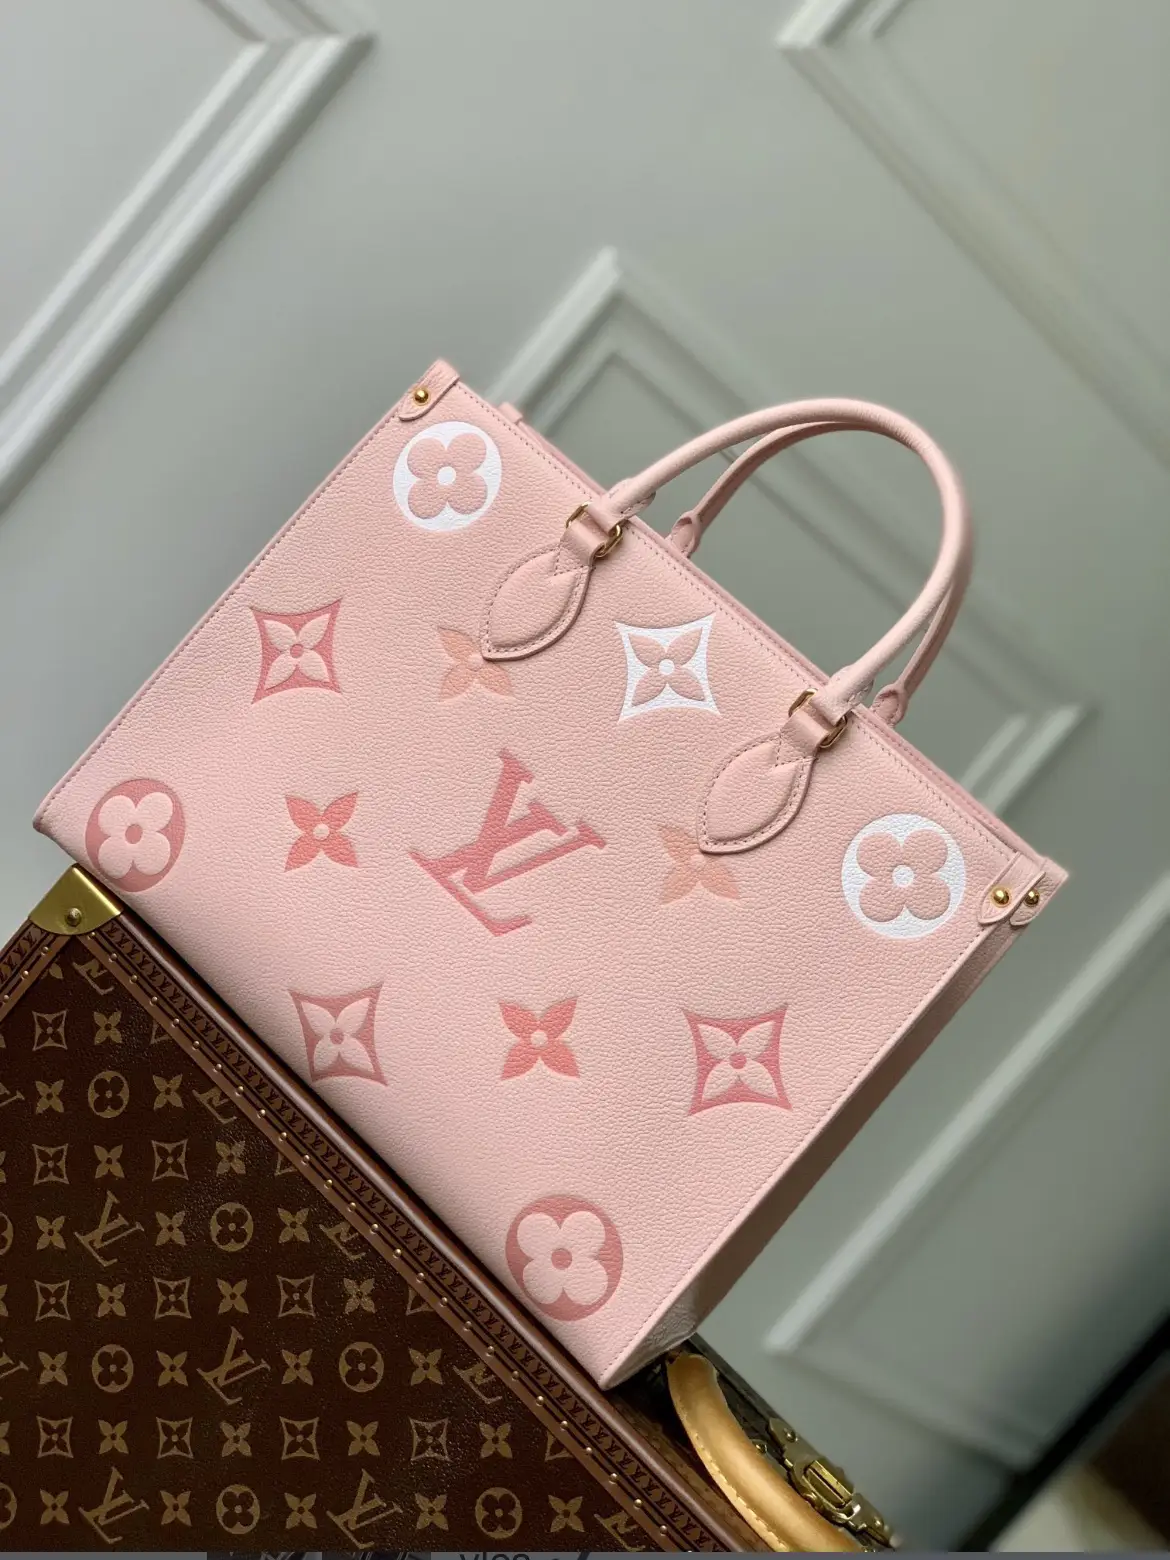 New arrival alert!! Another #louisvuitton totally PM is here